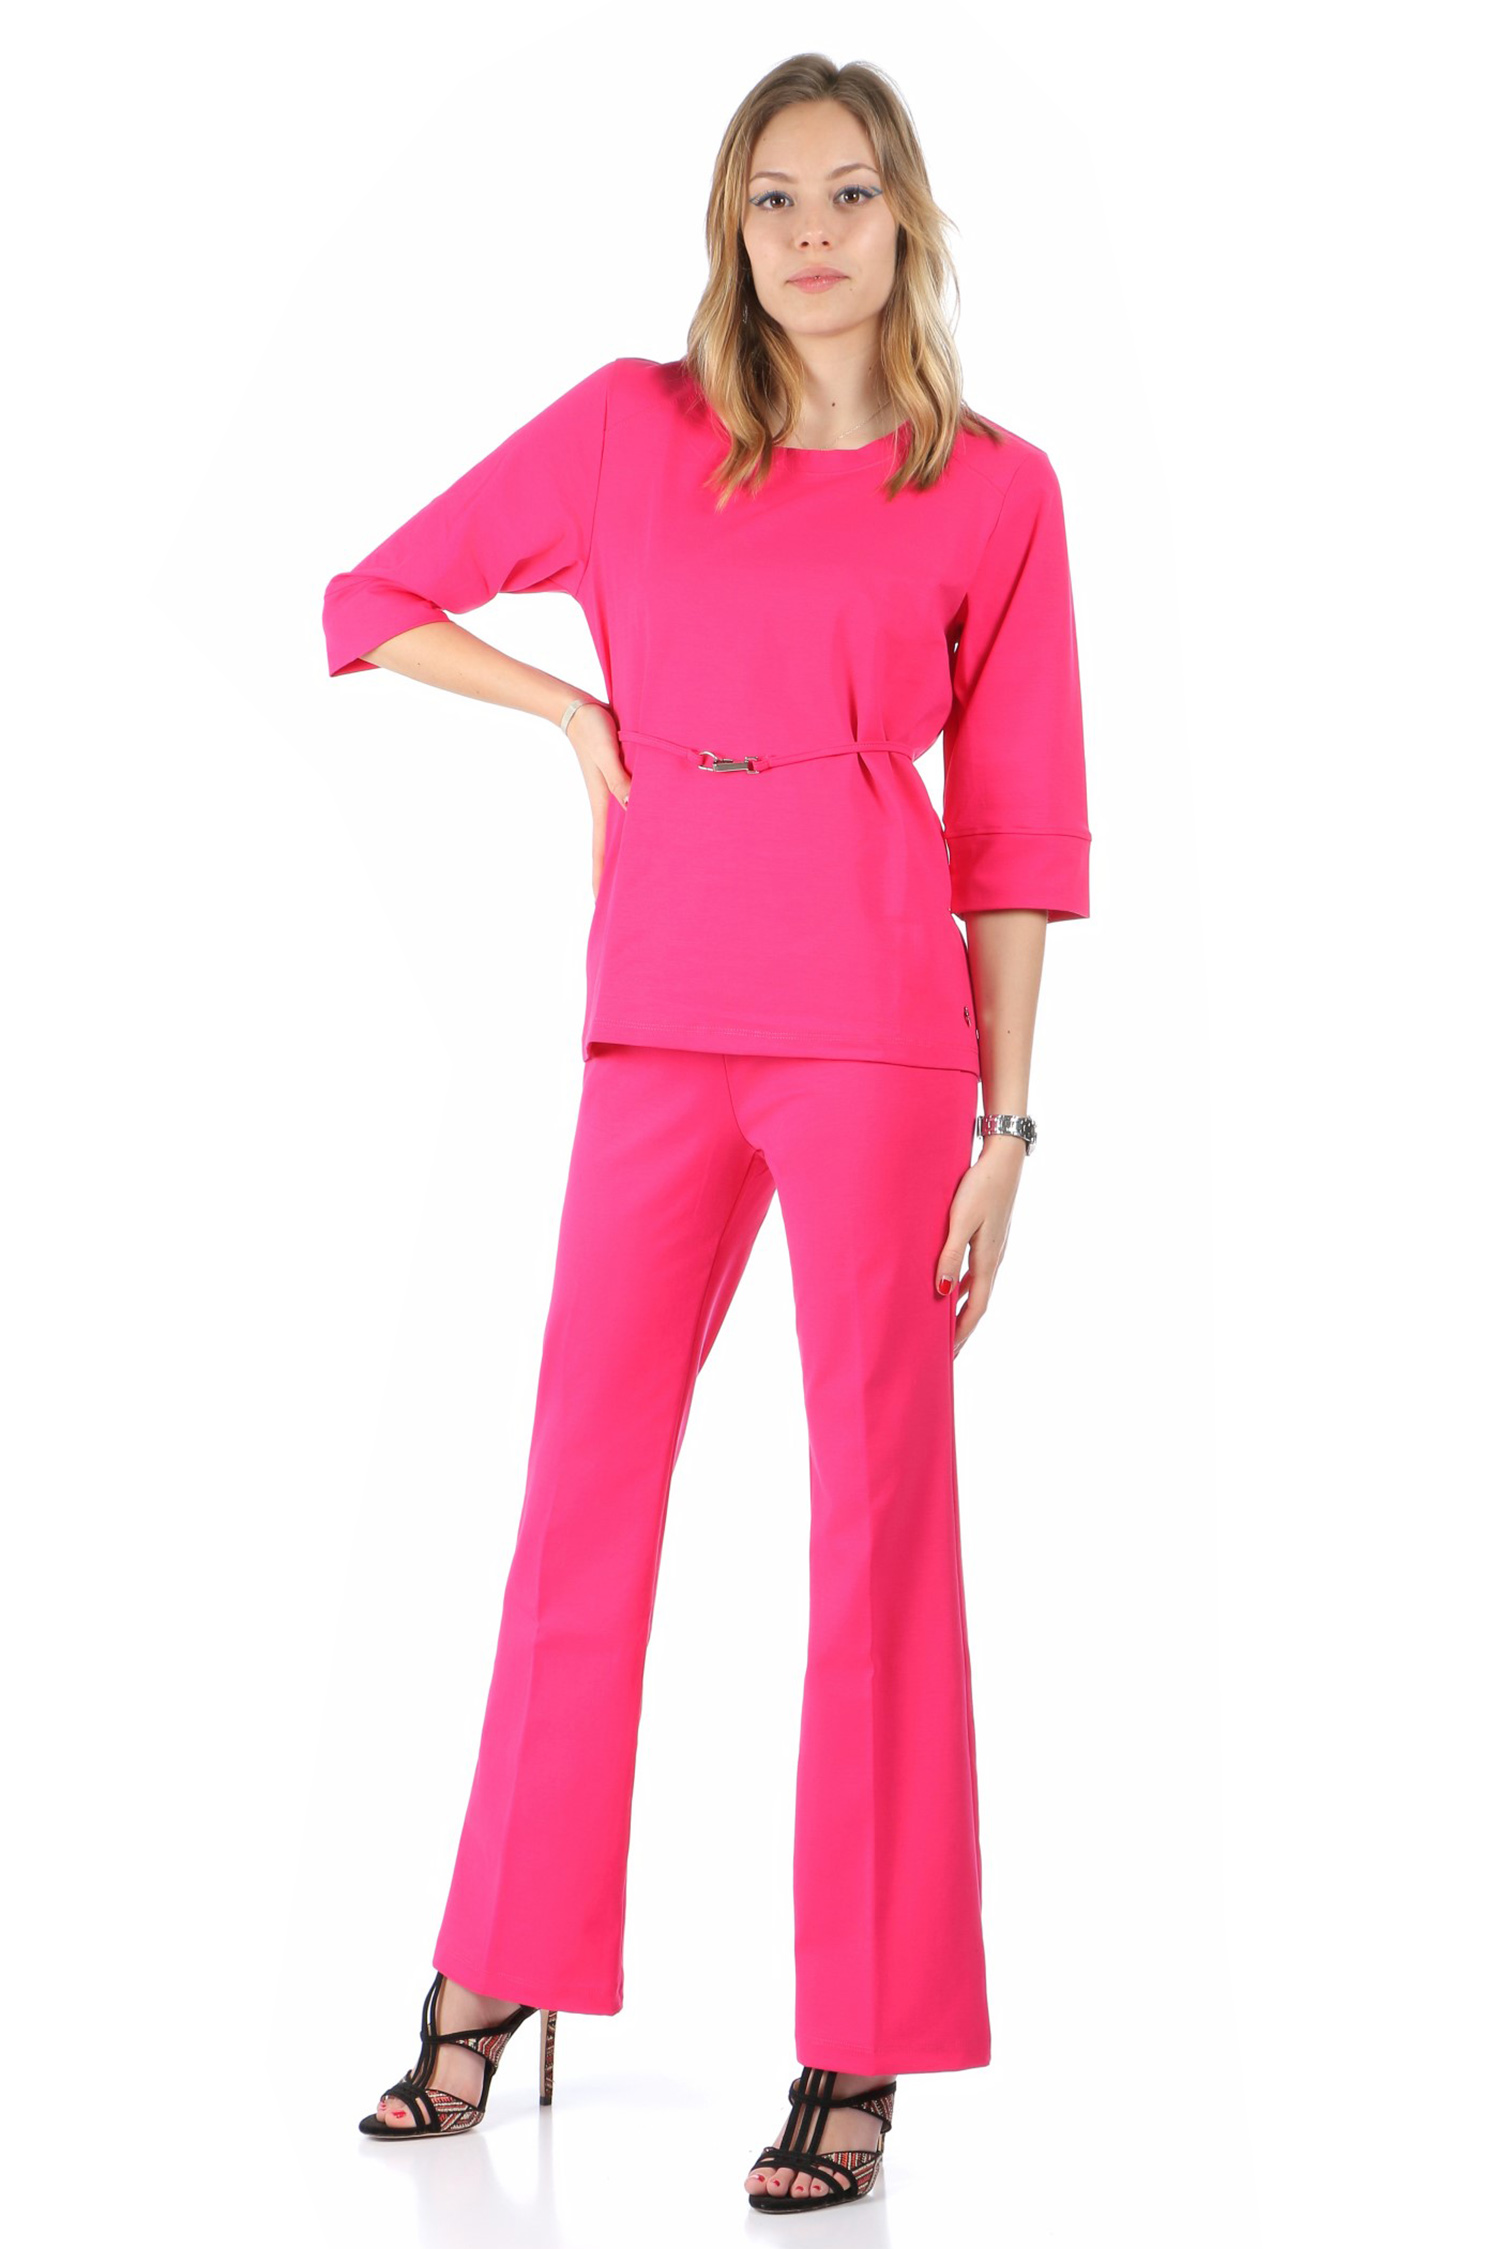 COMPLETO_EXTE_ACTUALLY_FUCSIA_LOOK04_large_lady